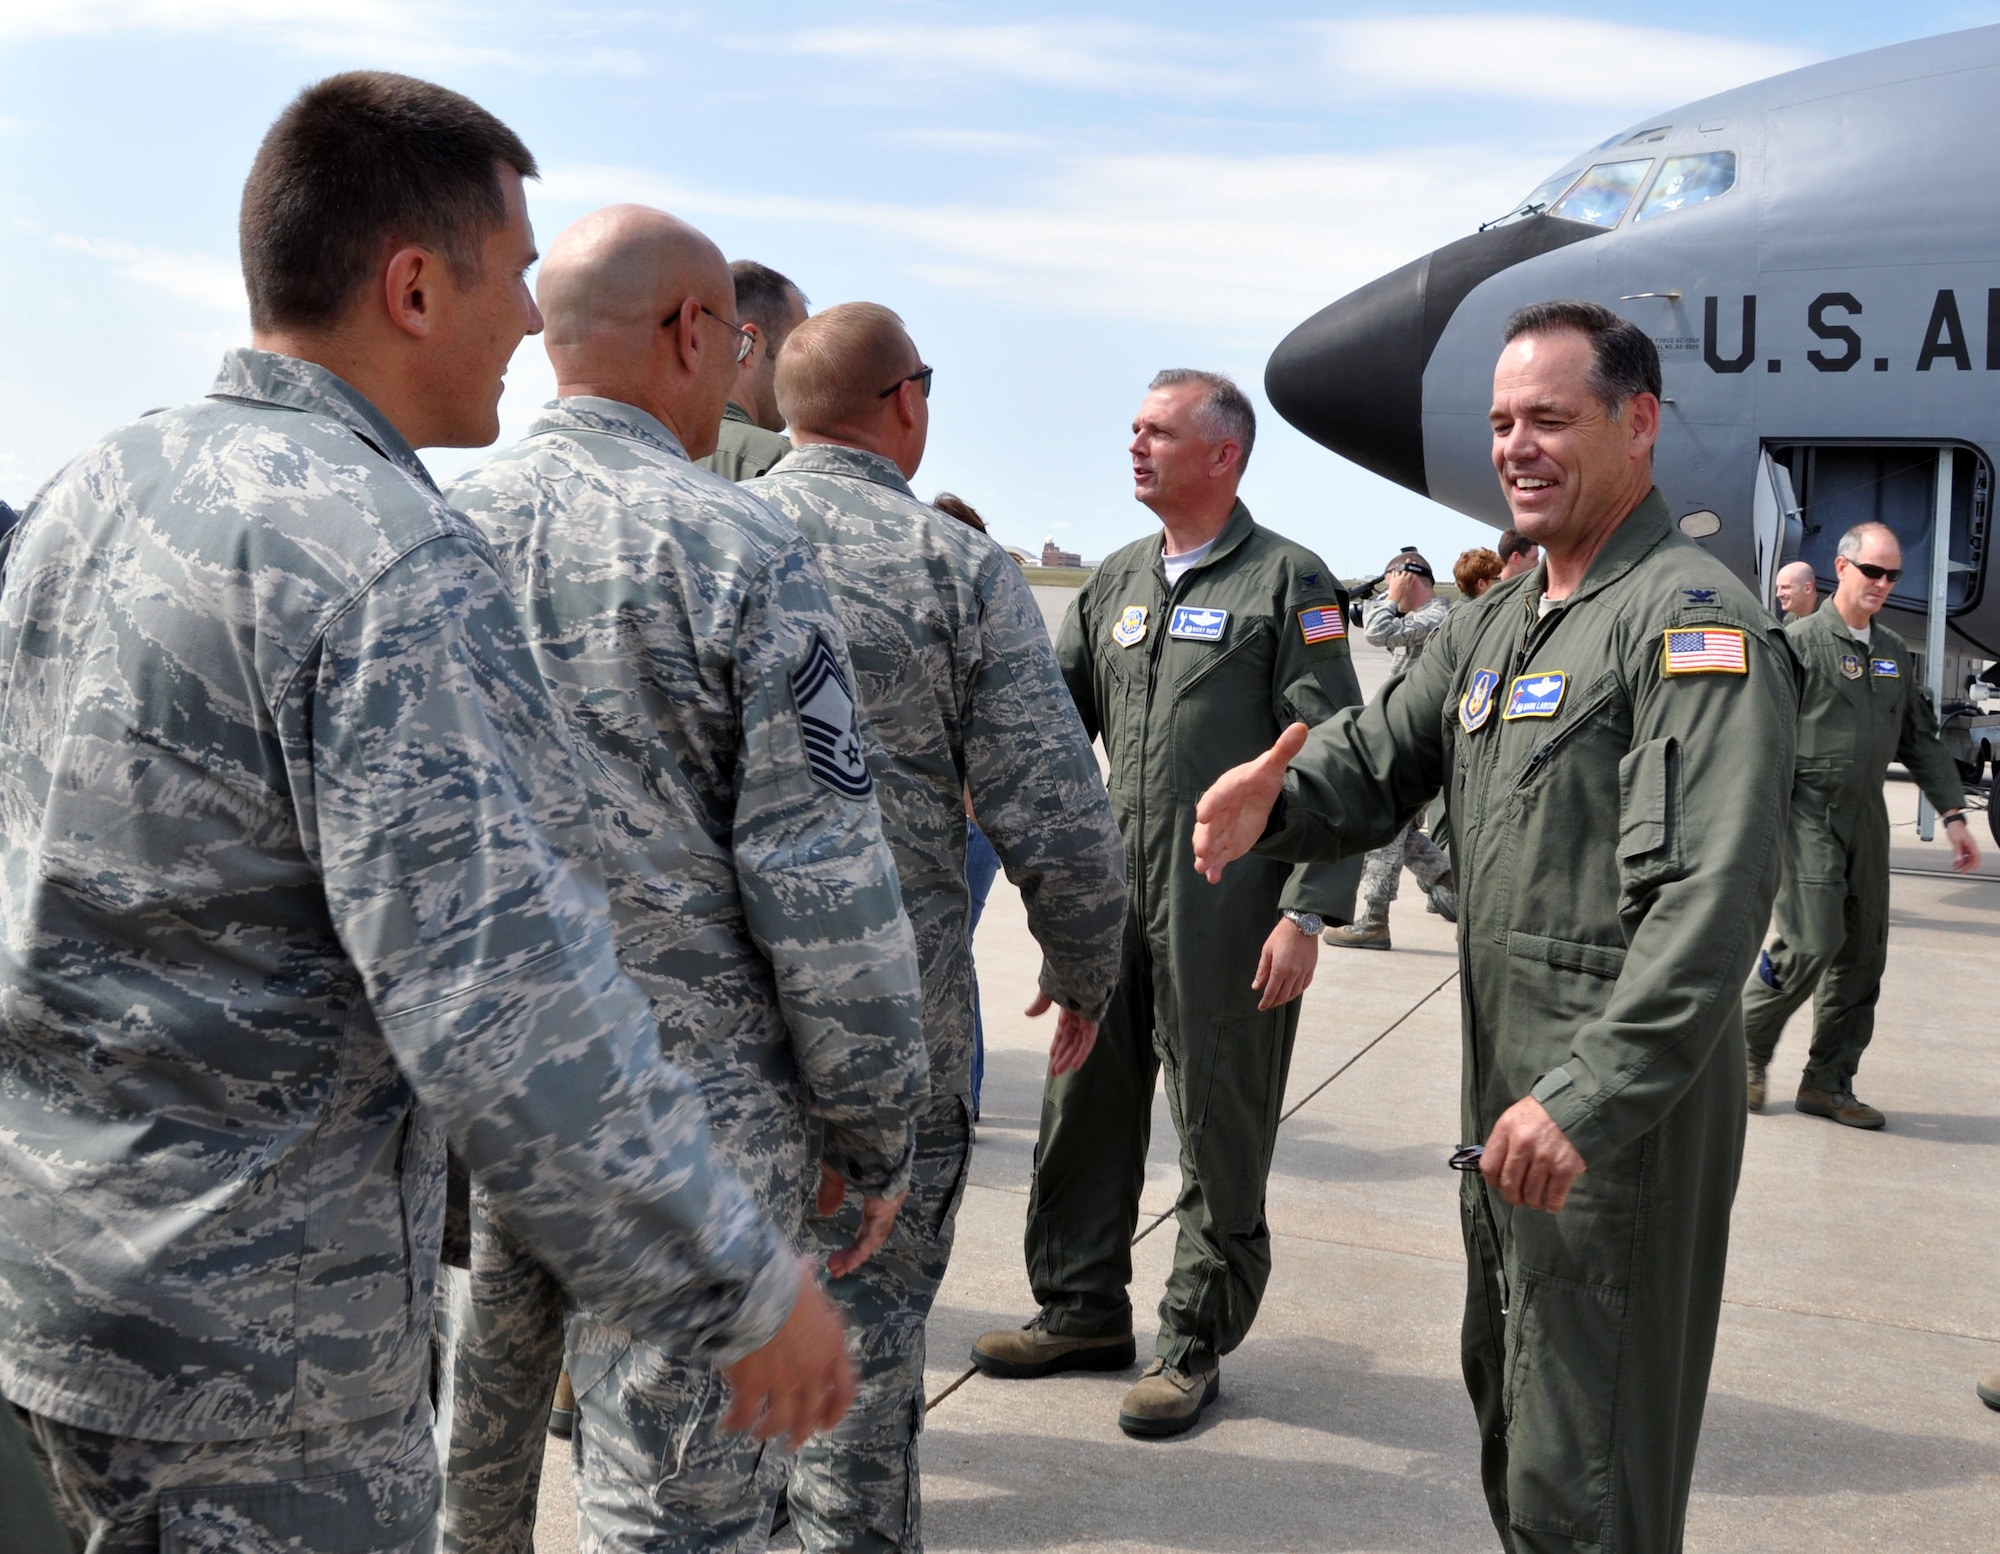 Col. Ricky N. Rupp, commander, 22nd Air Refueling Wing, and Col. Mark S. Larson, commander, 931st Air Refueling Group, congratulate members of Team McConnell following the 931st's final local mission of fiscal year 2012.  The 931st achieved its target of flying 3, 688 hours for the fiscal year on the final local mission.  (U.S. Air Force photo by 1st Lt. Zach Anderson)